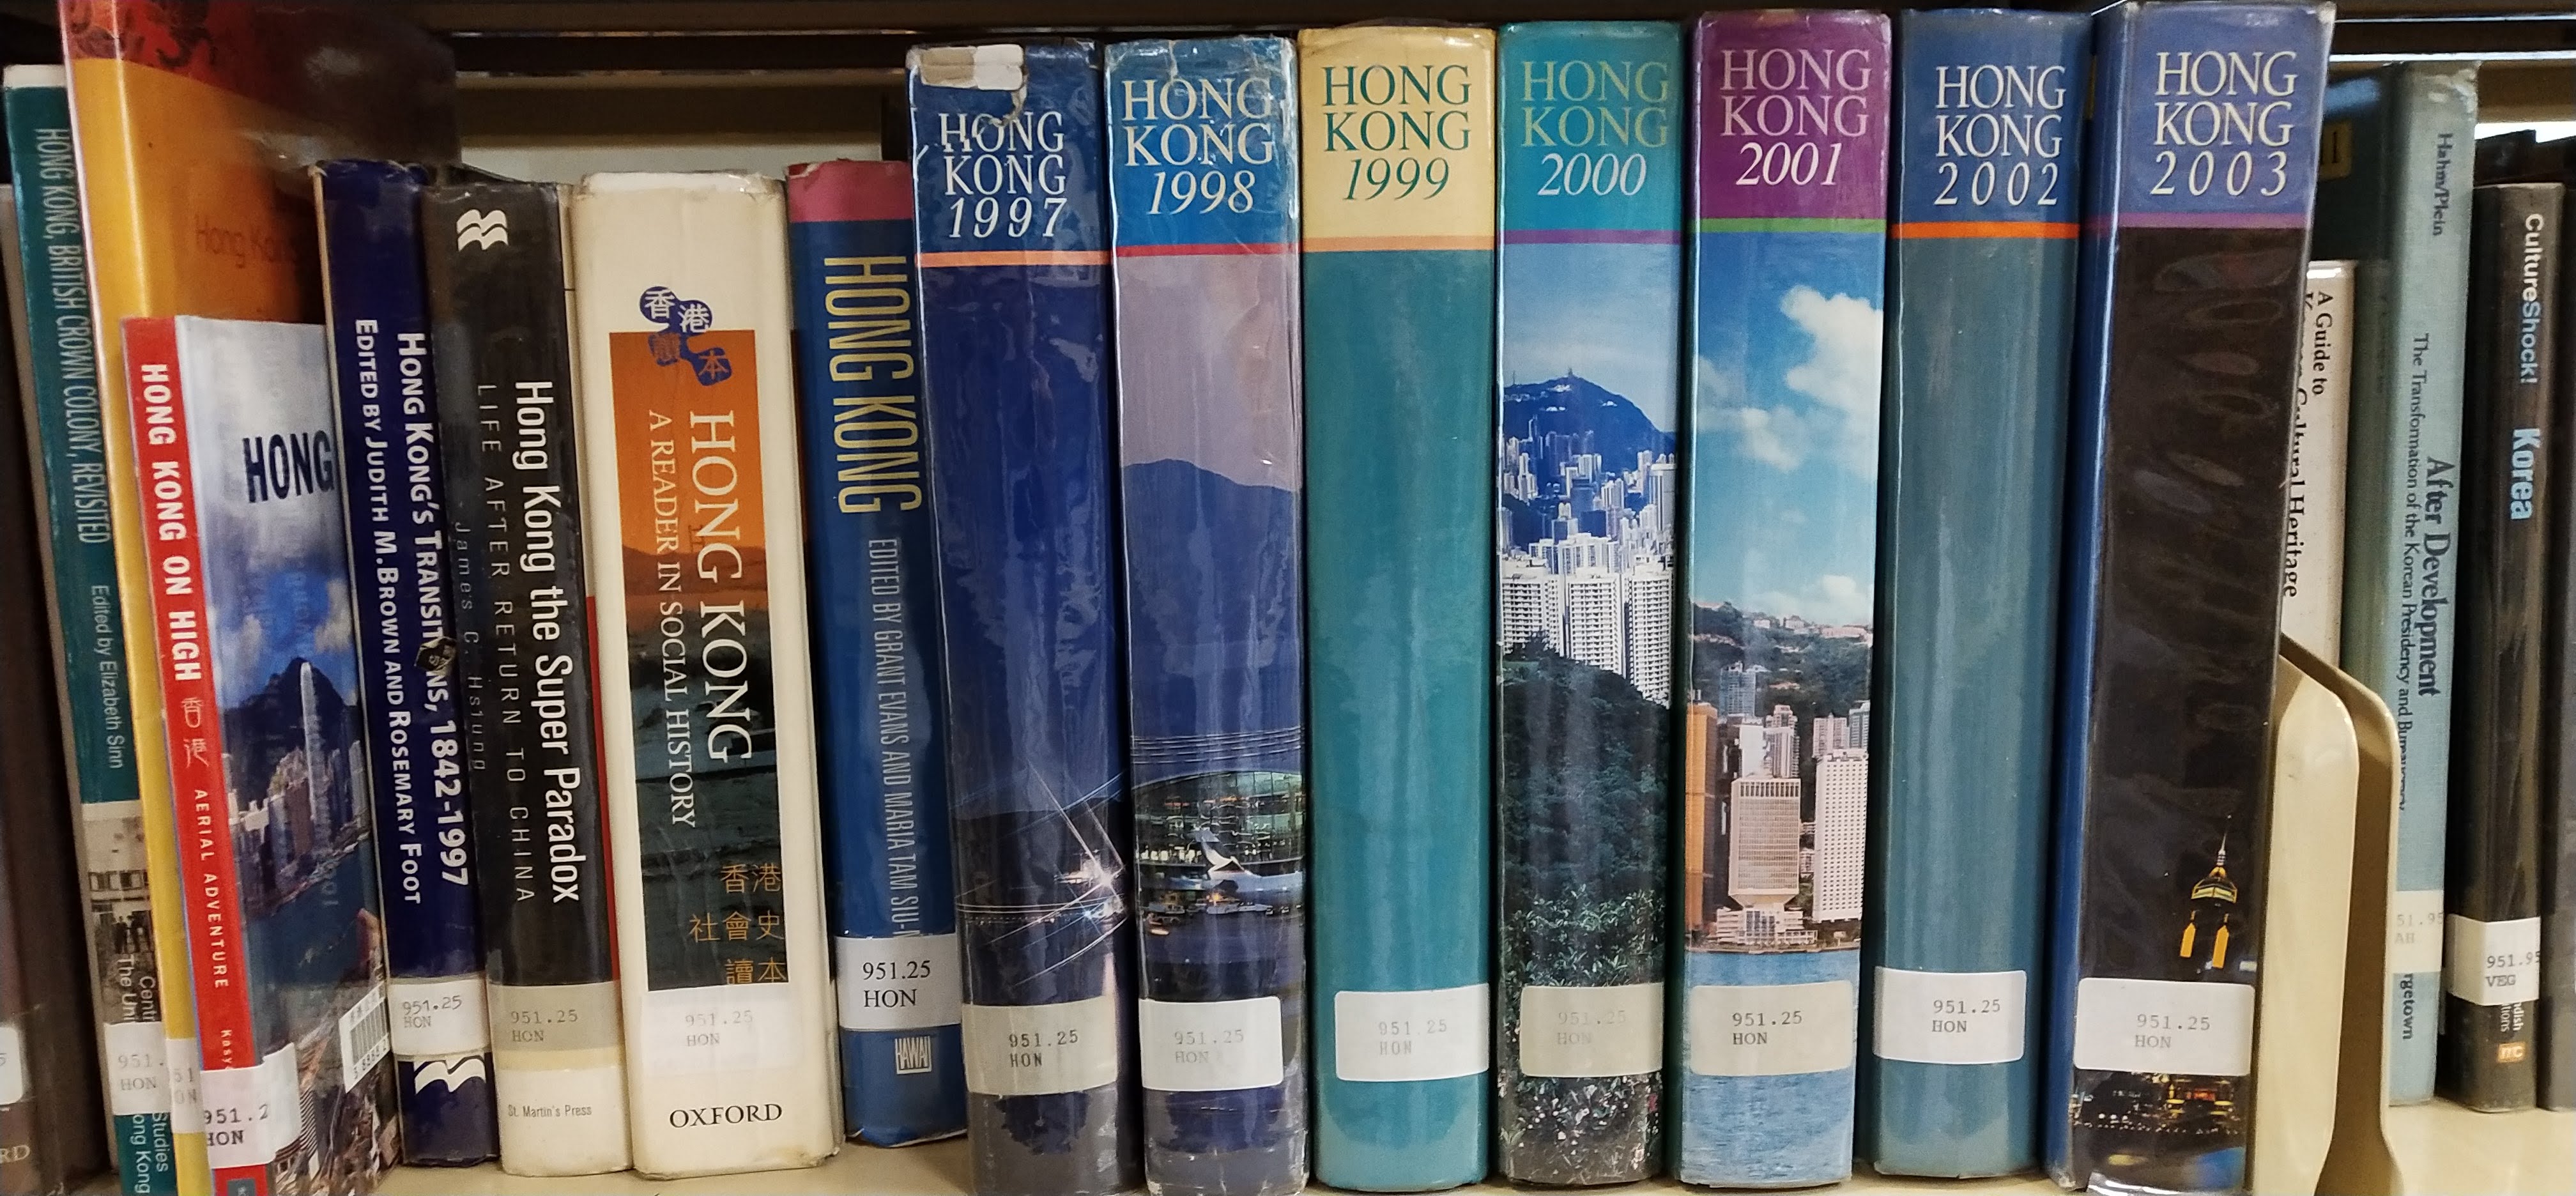 Reference books for Hong Kong in City Hall Library